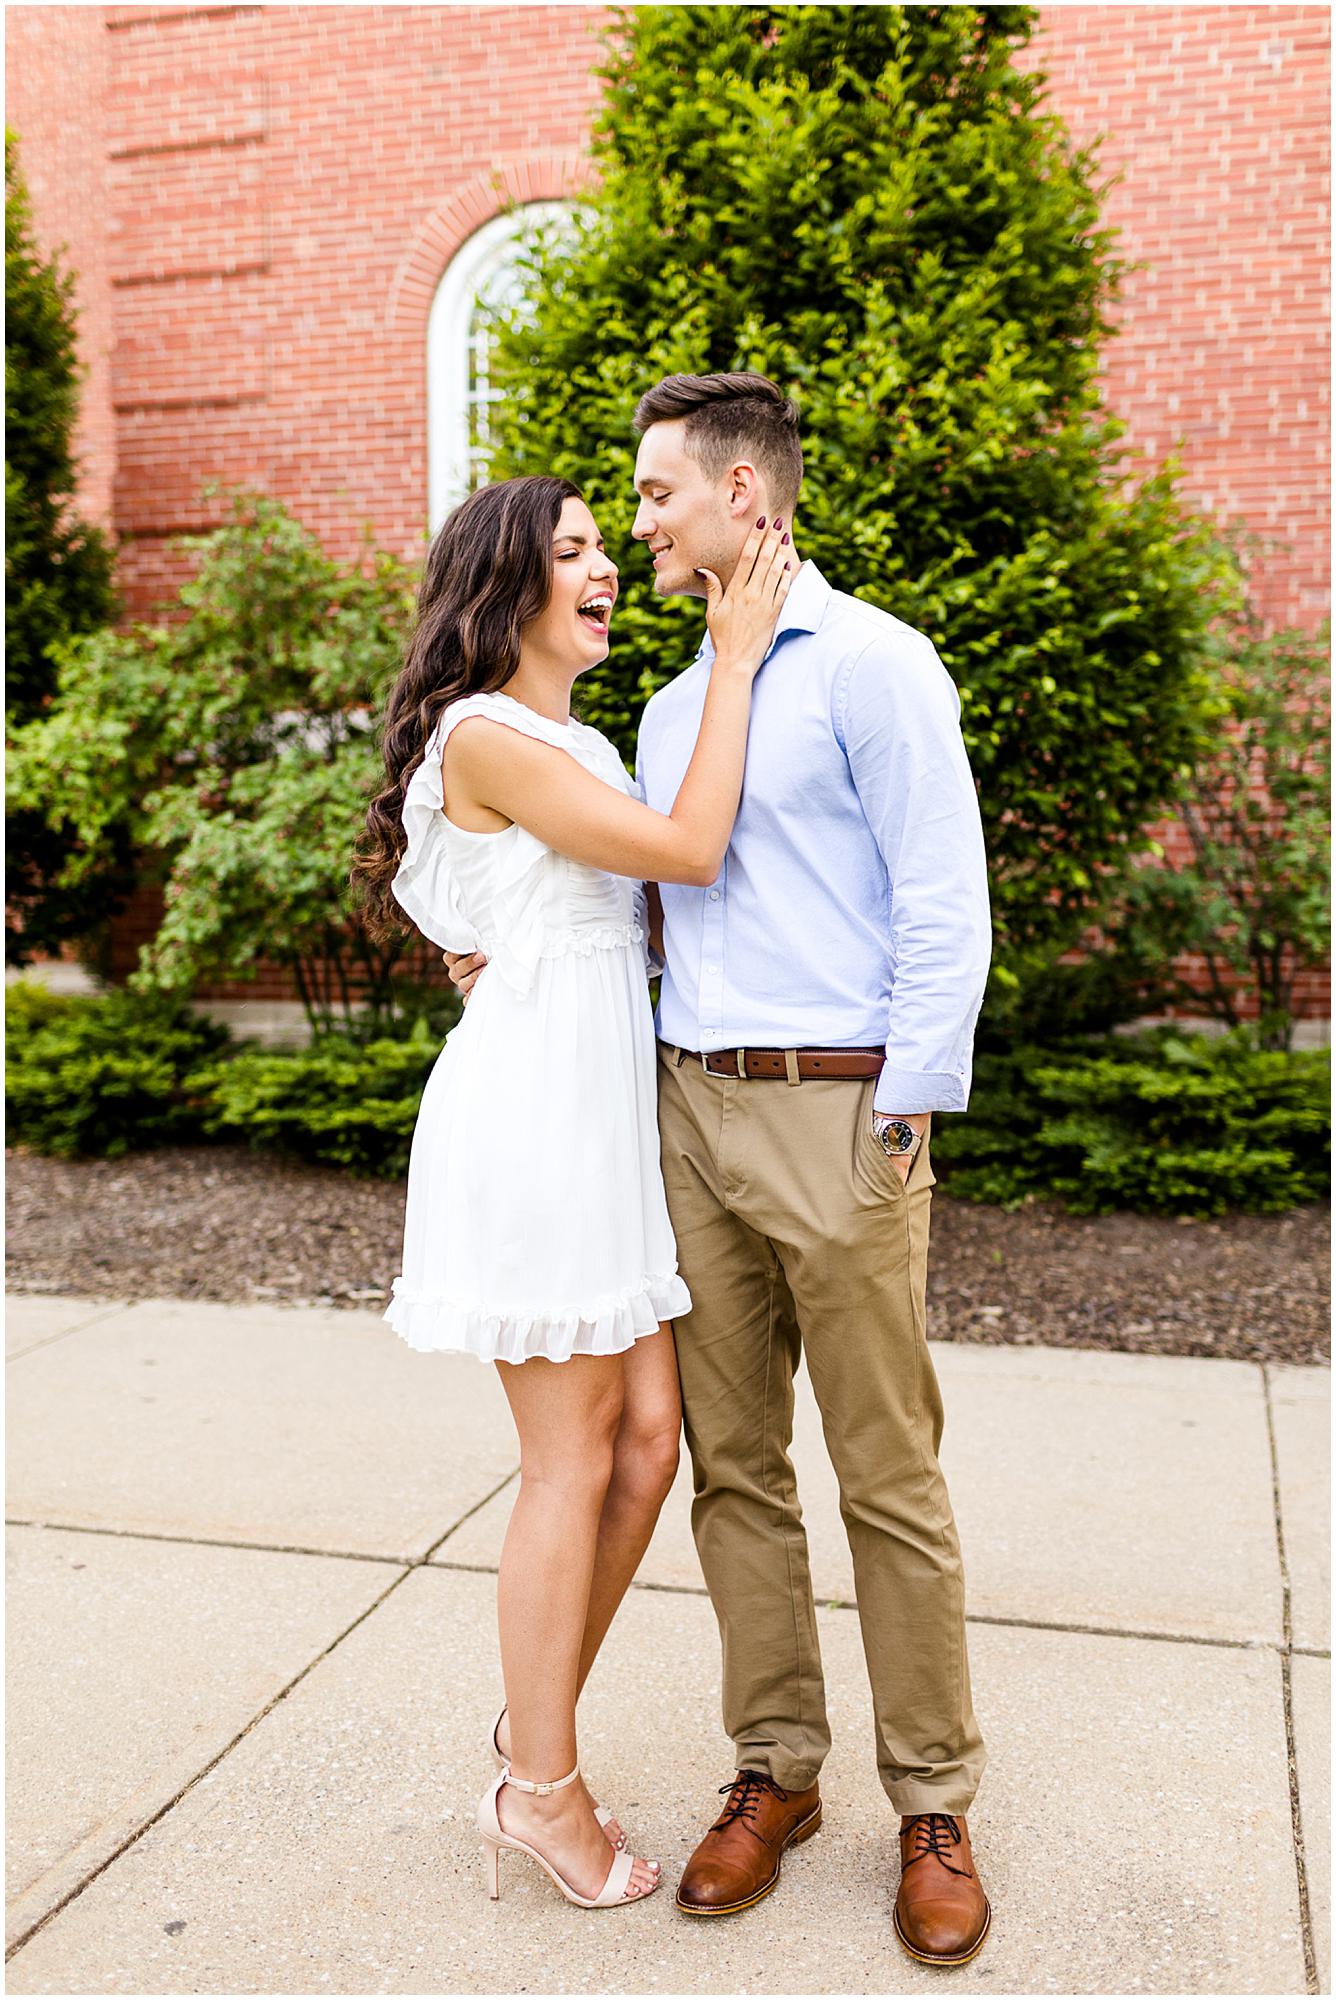 Caitlin-and-Luke-Photography-Illinois-State-University-Proposal-Photos-Normal-IL-engagement-session-Illinois-State-proposal_1064.jpg